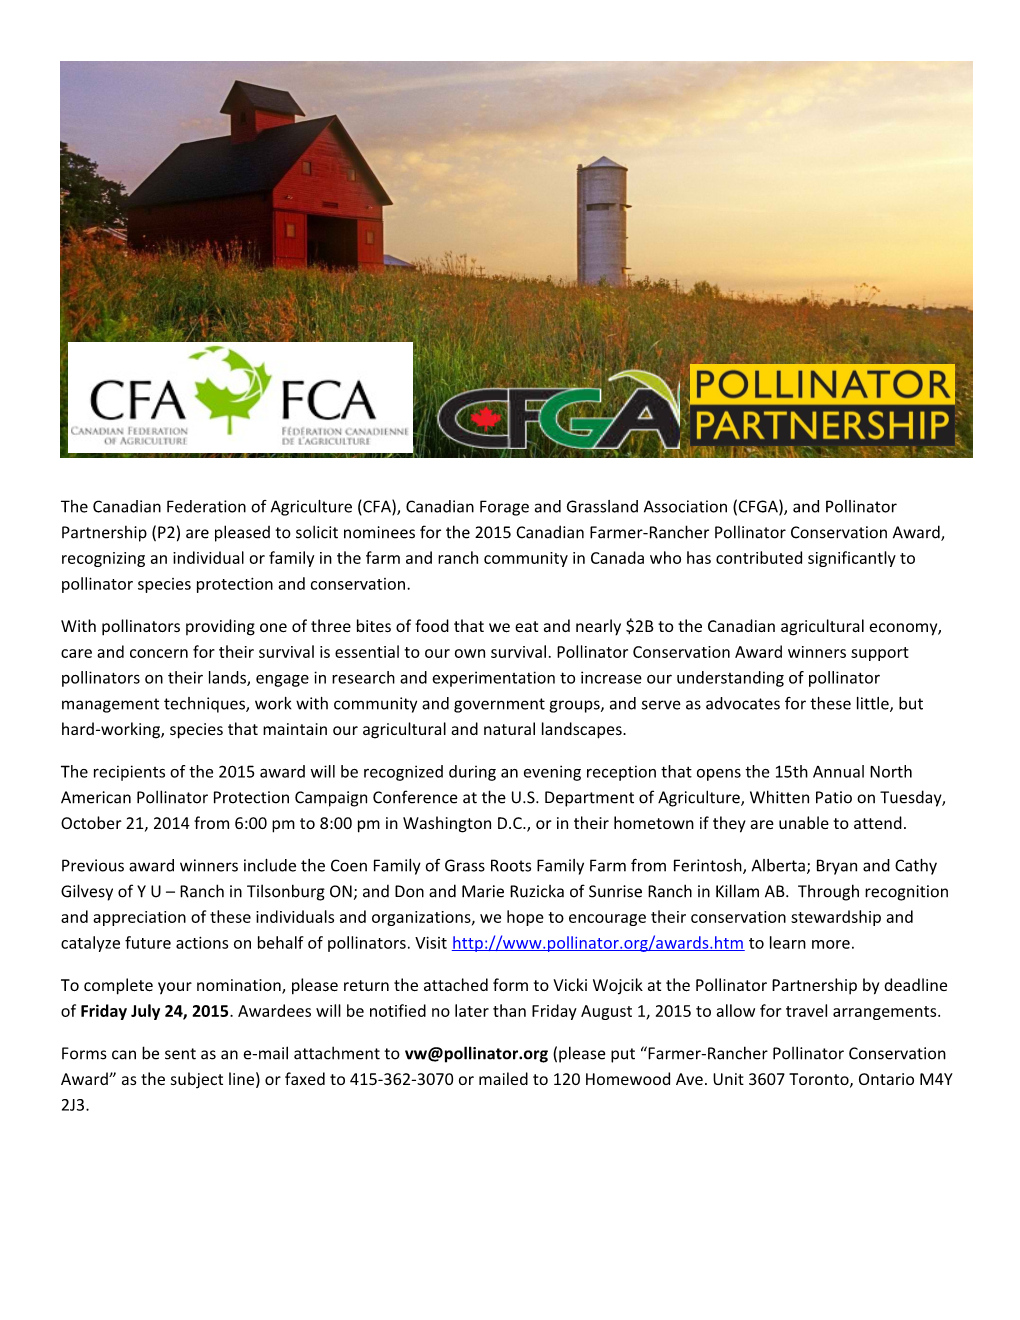 The Canadian Federation of Agriculture (CFA), Canadian Forage and Grassland Association